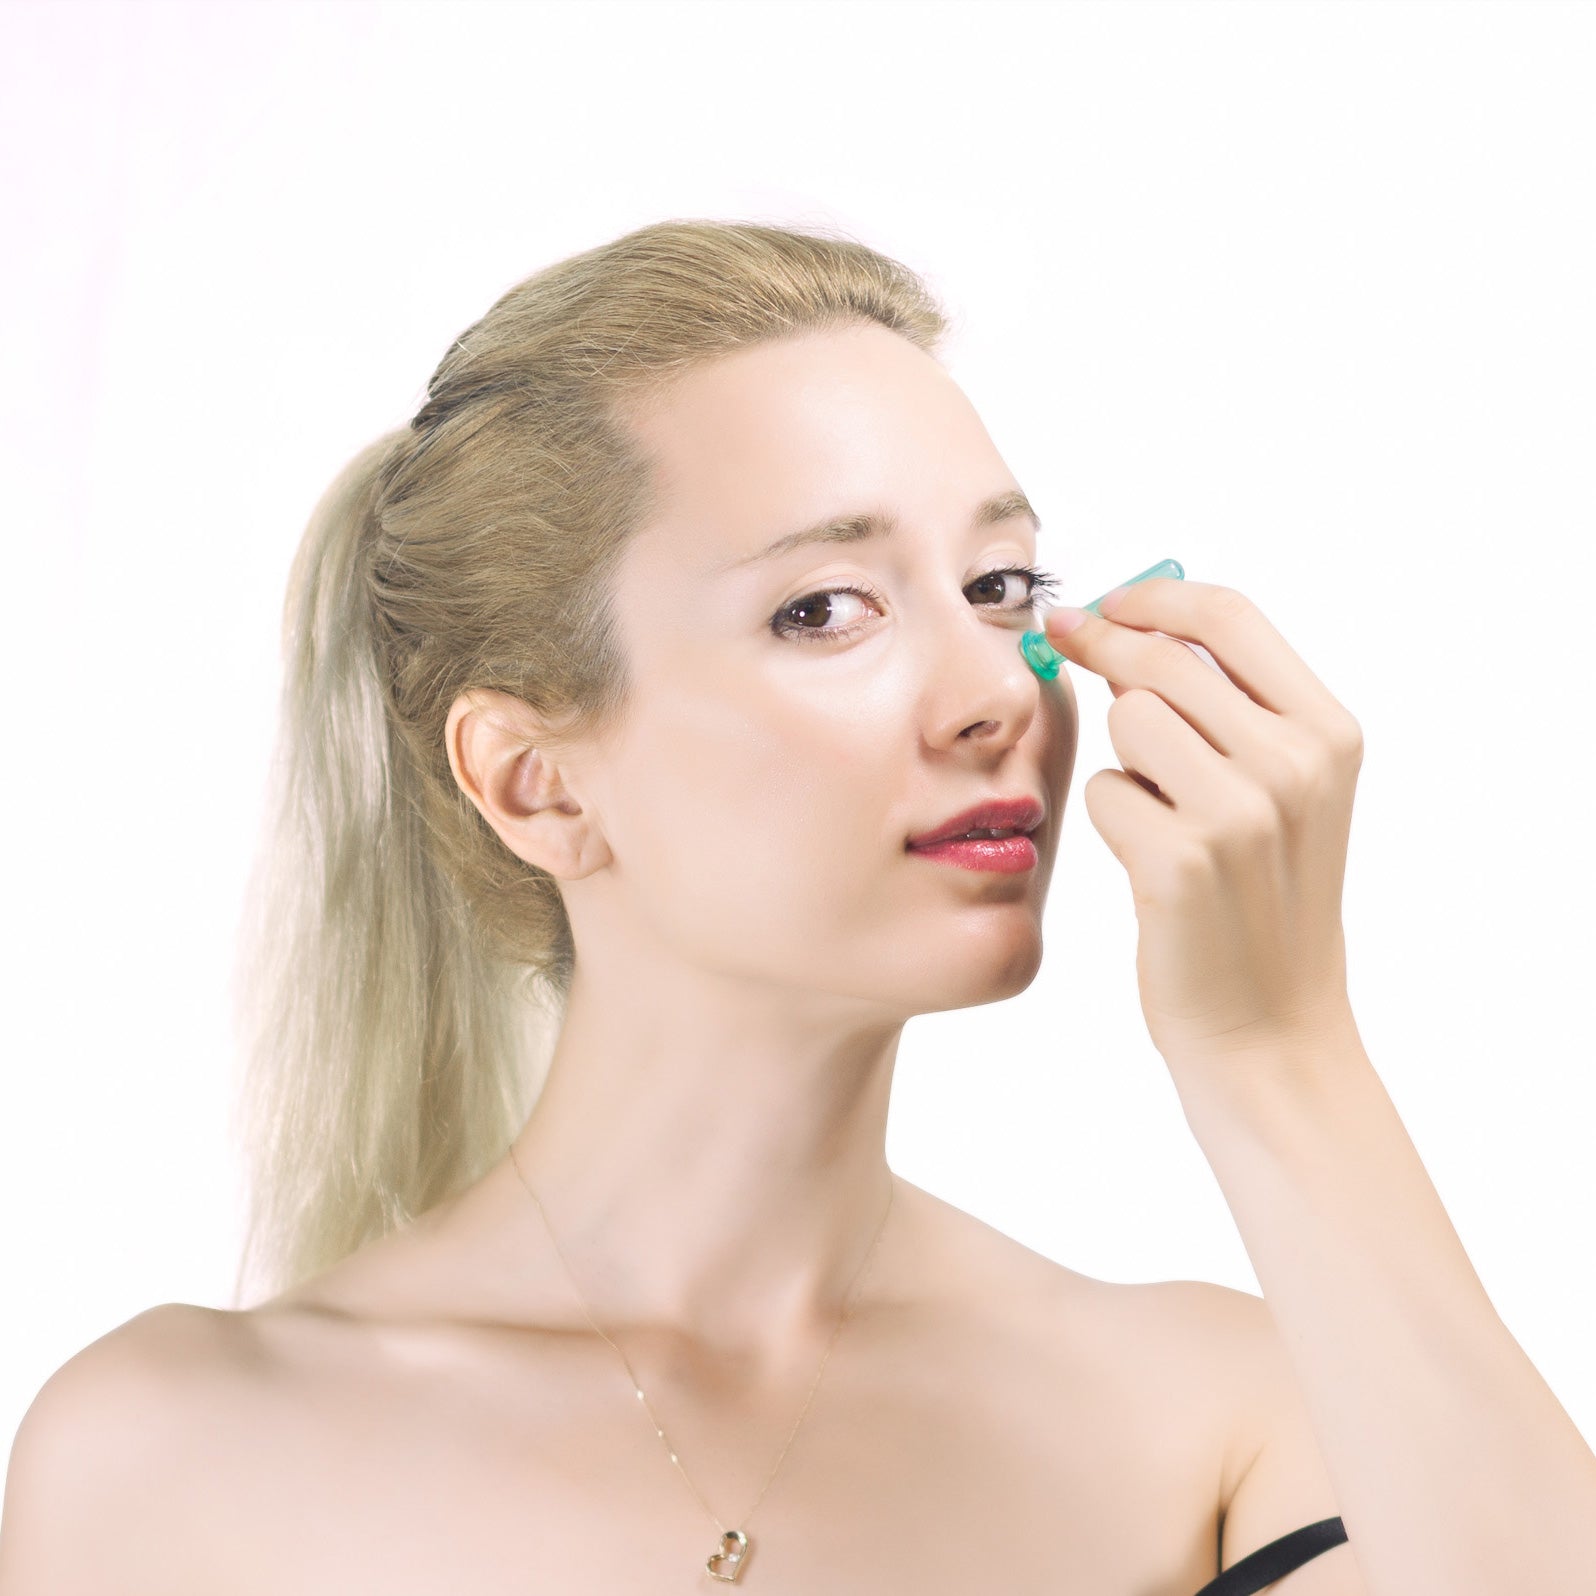 All natural ways to get rid of dark under eye circles from Lierre.ca